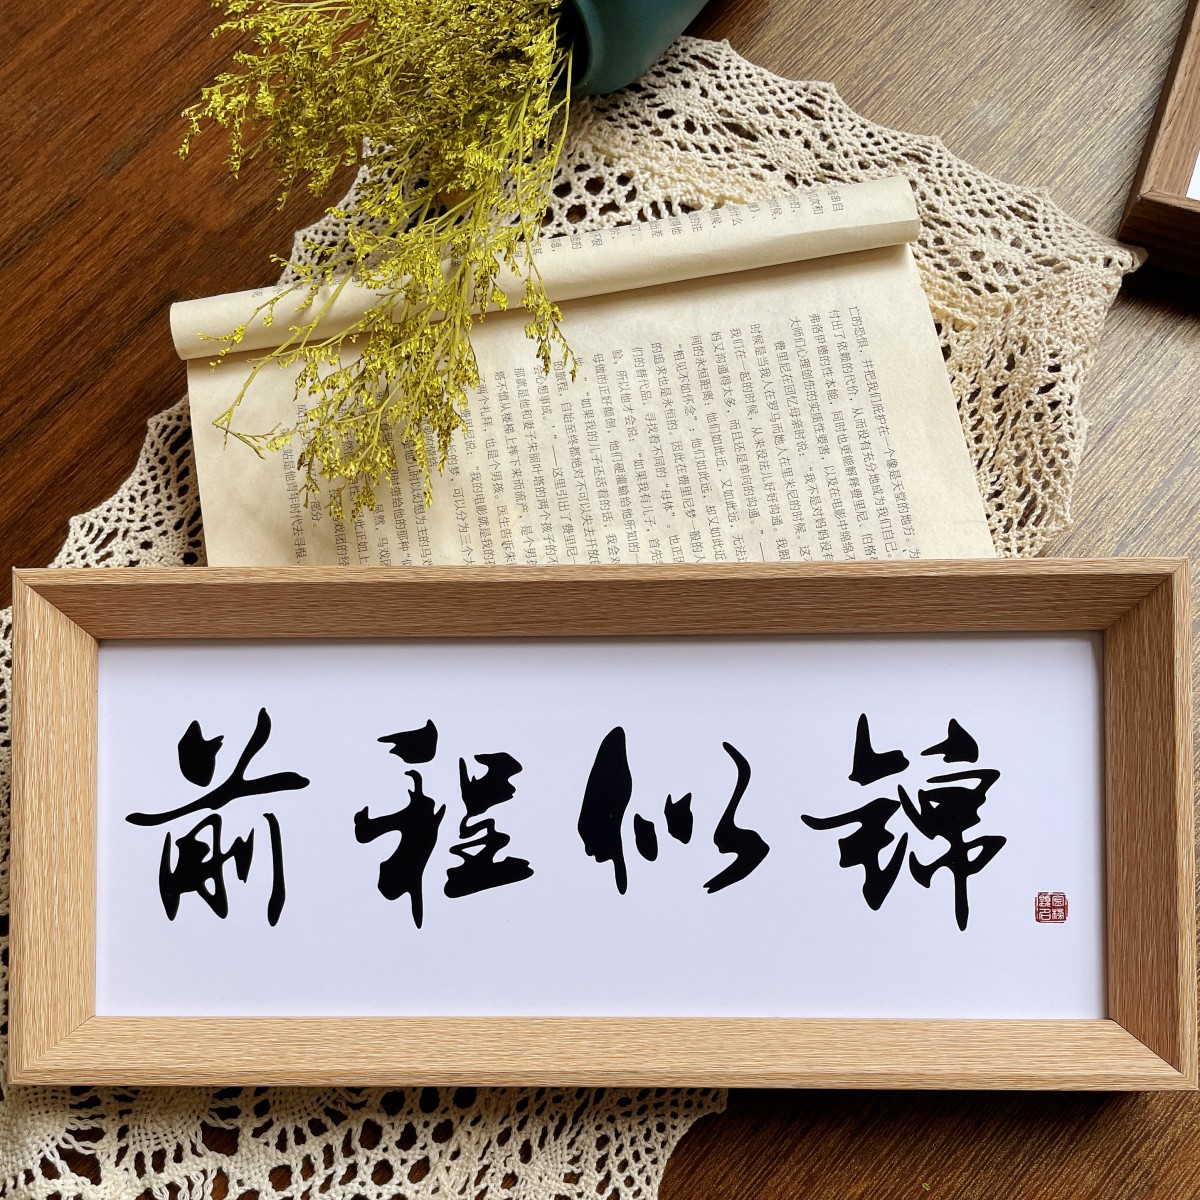 Wooden Inspirational Calligraphy Works Frame New Chinese Calligraphy Painting Mounting Table-Top Picture Frame Vintage Photo Frame Display